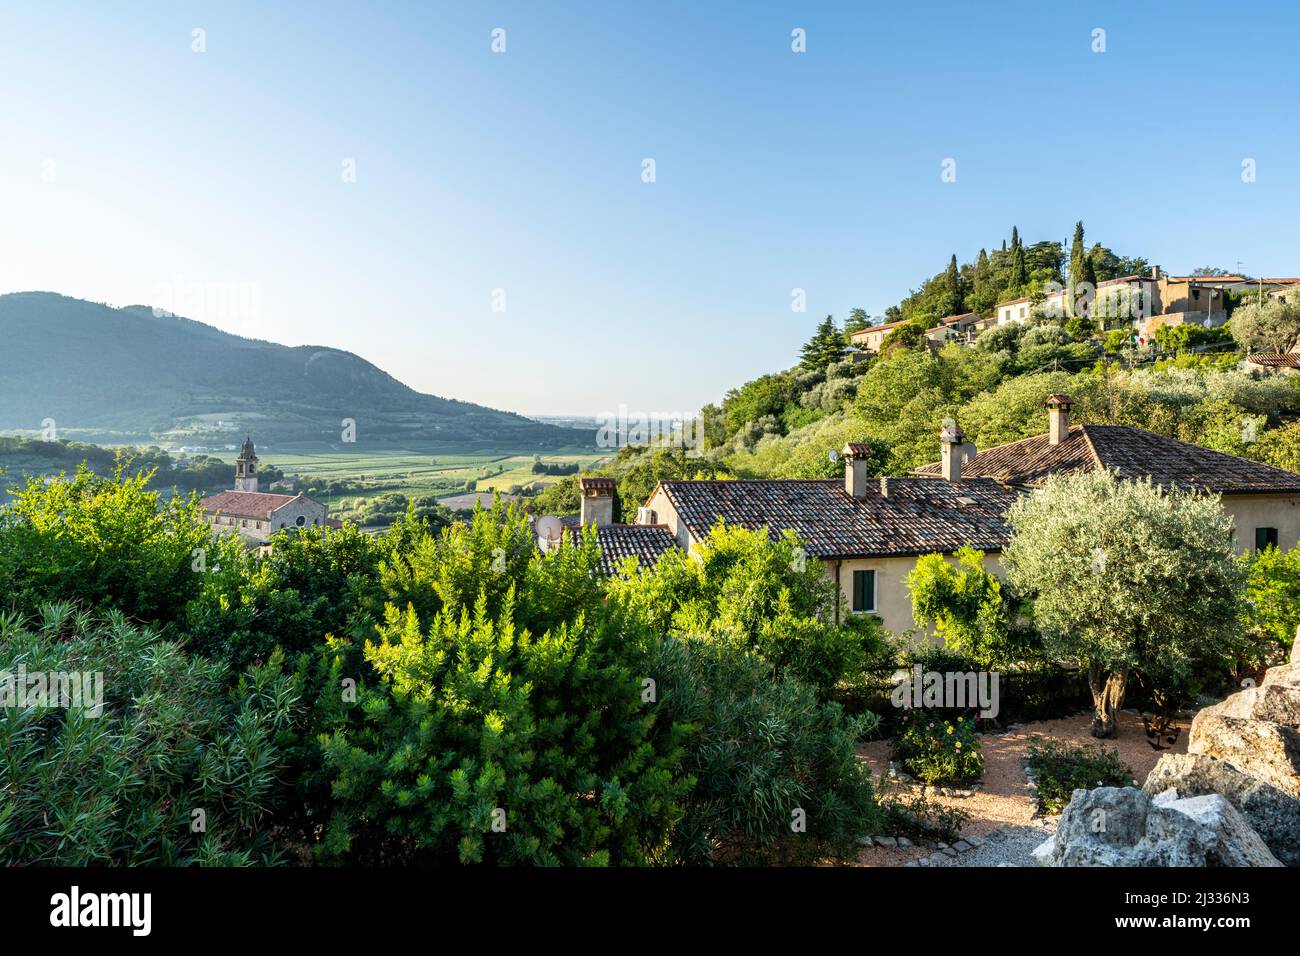 Exterior views of Arqua Pertrarca, one of the most beautiful villages in Italy, Veneto, Italy Stock Photo